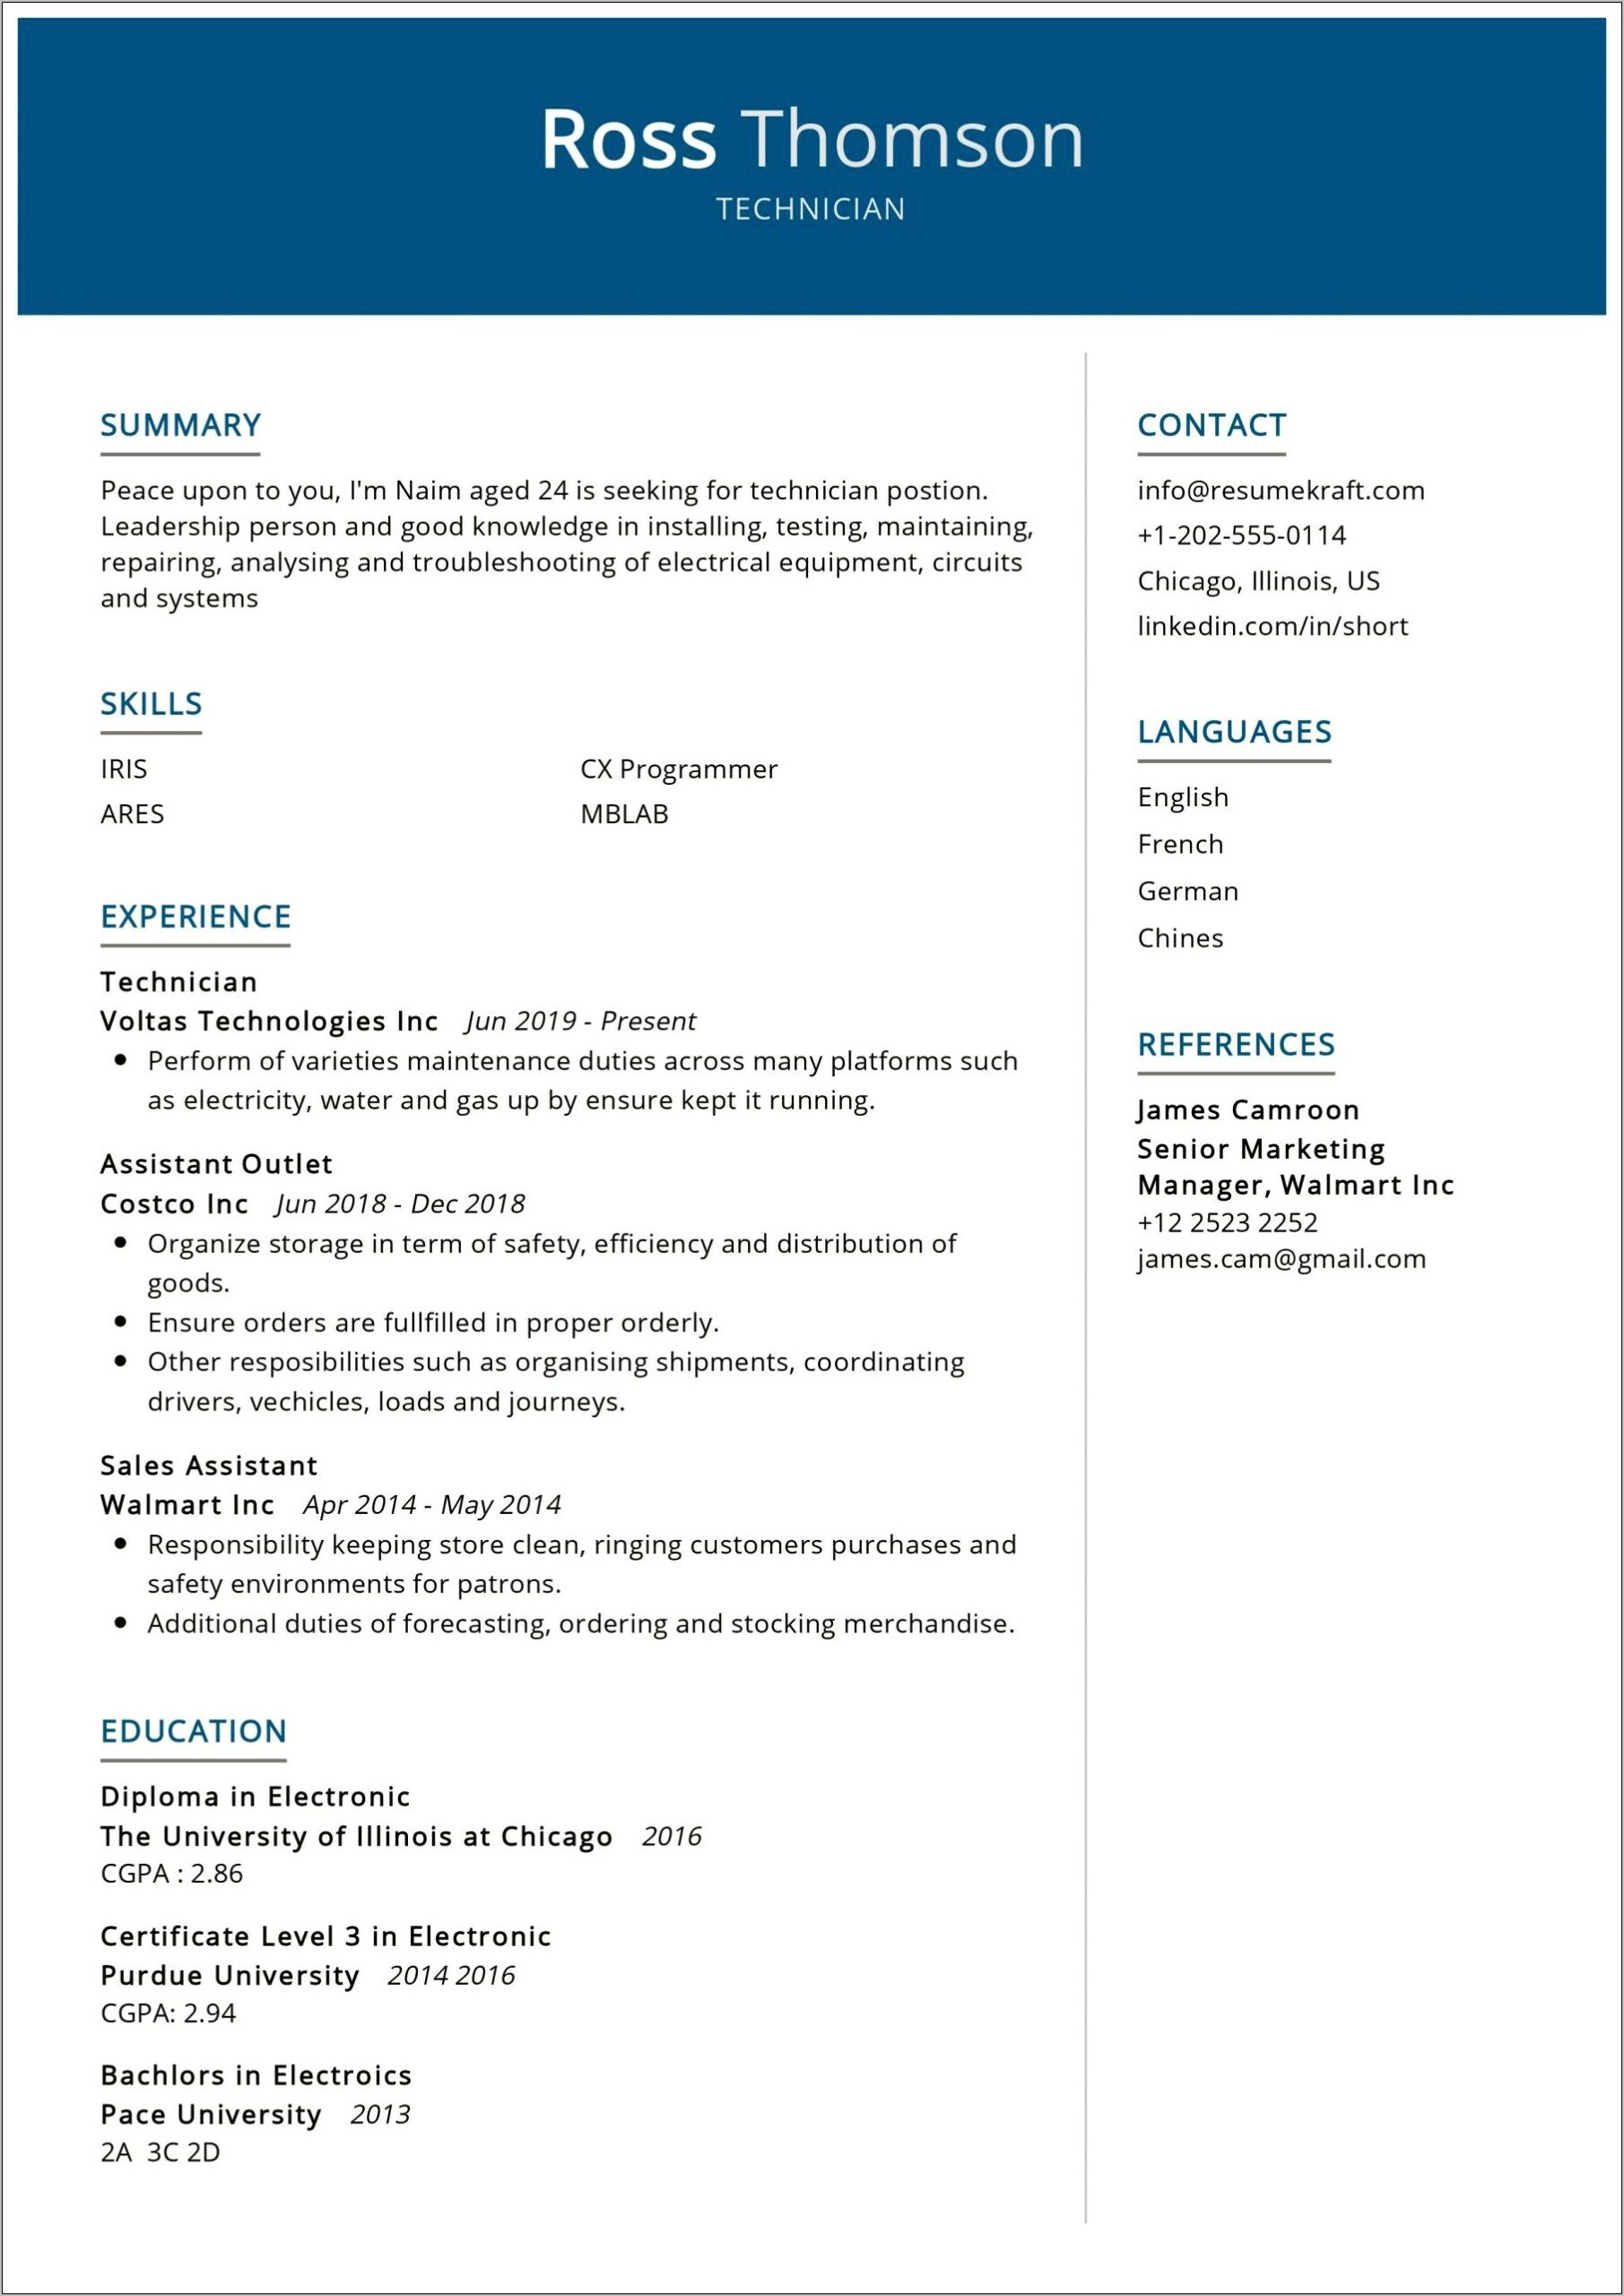 Electronic Reapair Specialist Resume Example